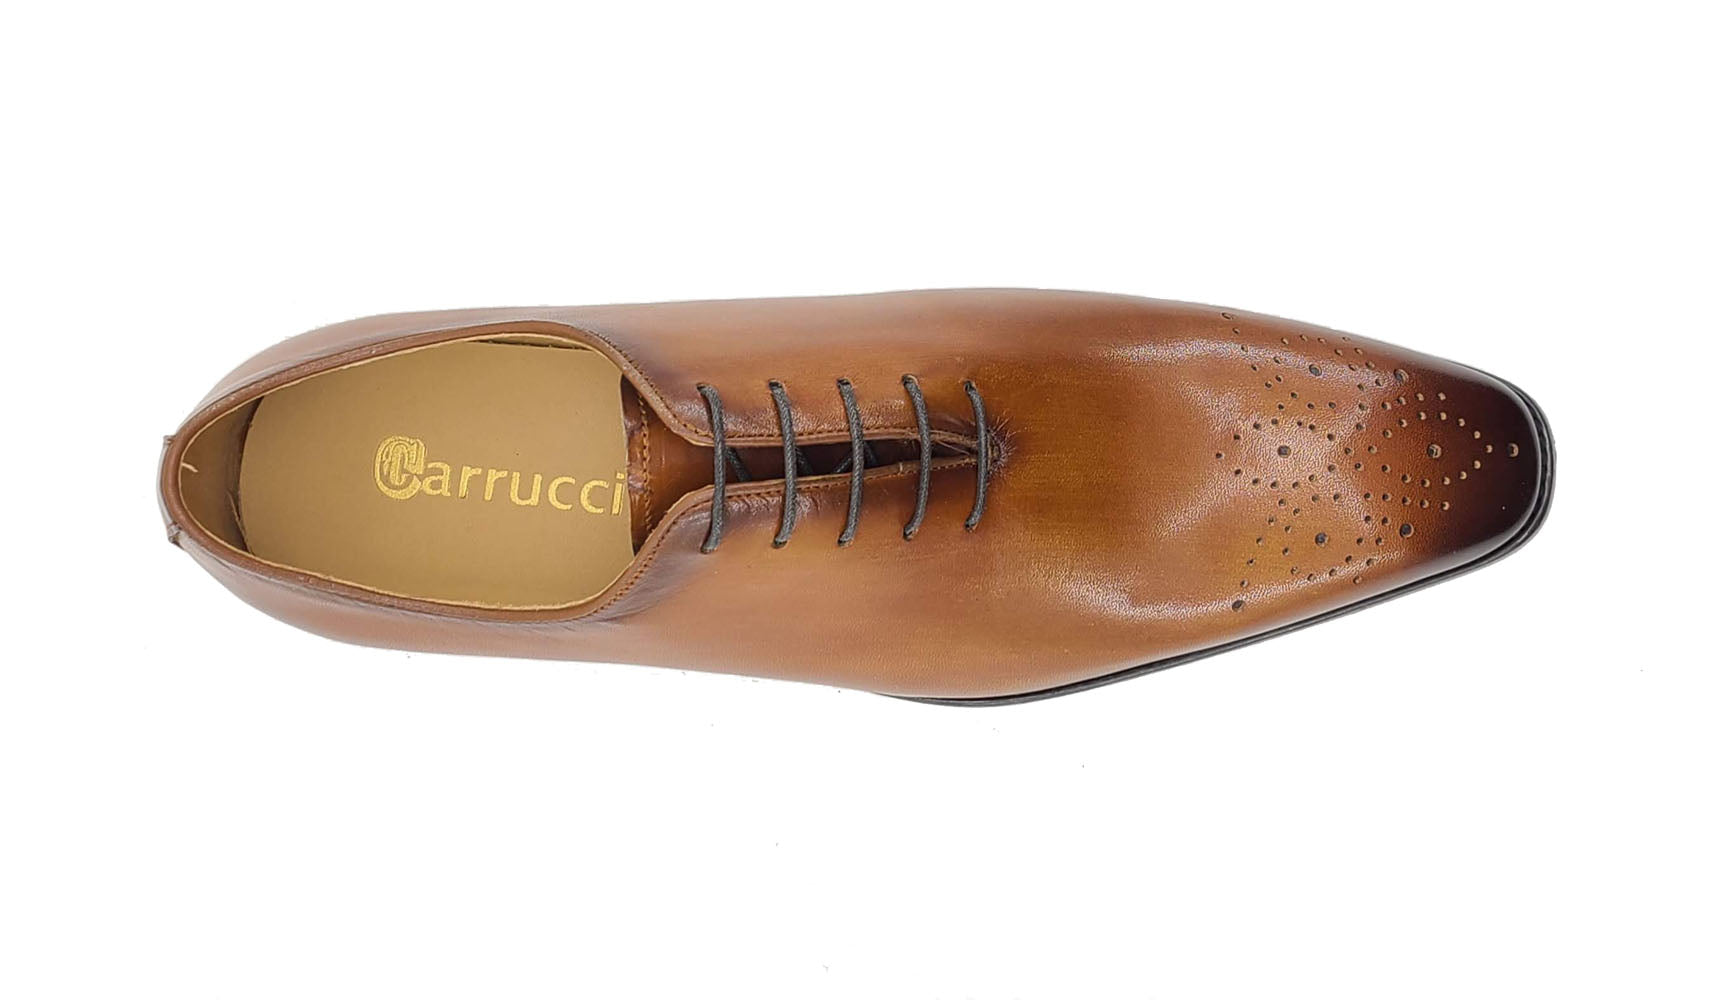 Hand Burnished Leather Wholecut Calf Oxford